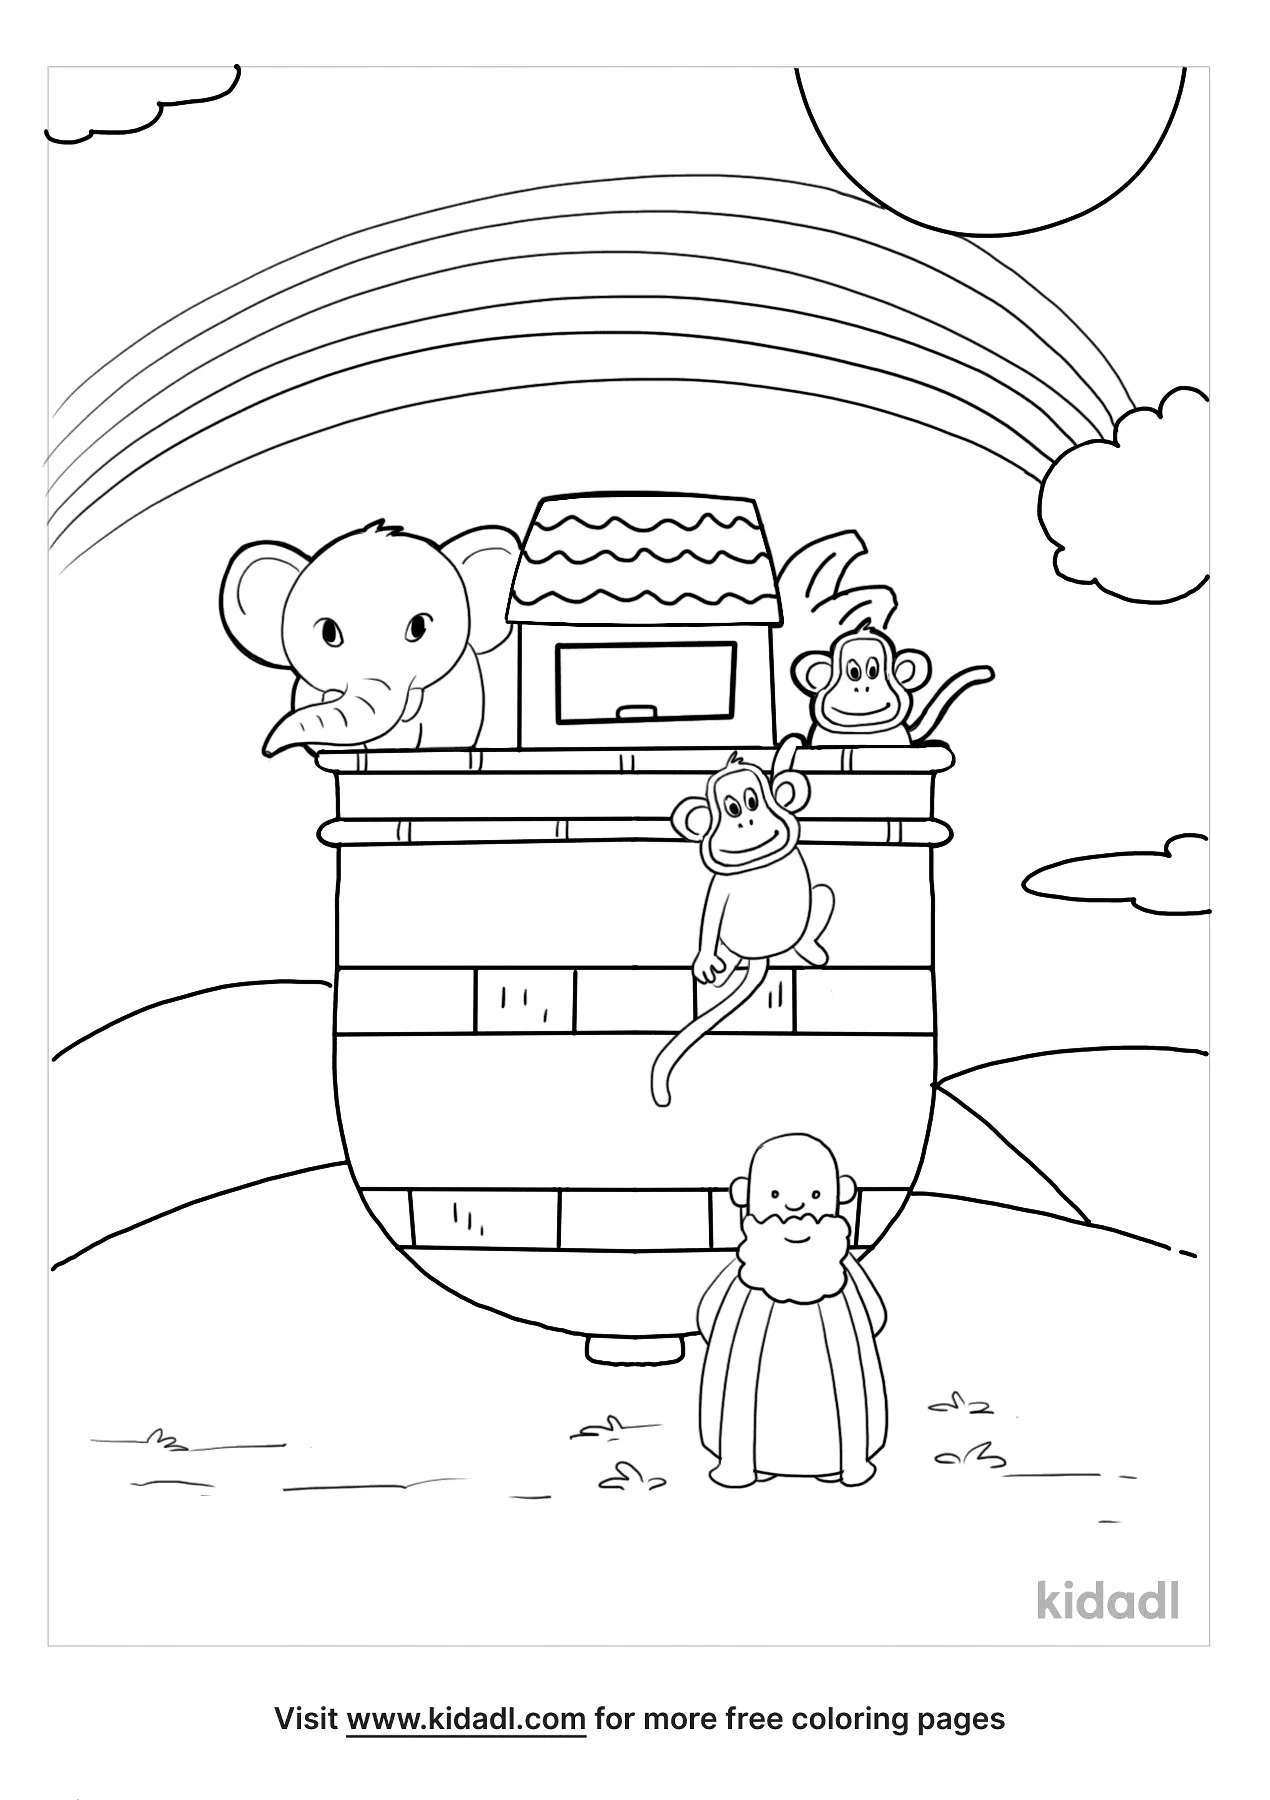 Noah's Ark Coloring Pages | Free Bible Coloring Pages | Kidadl